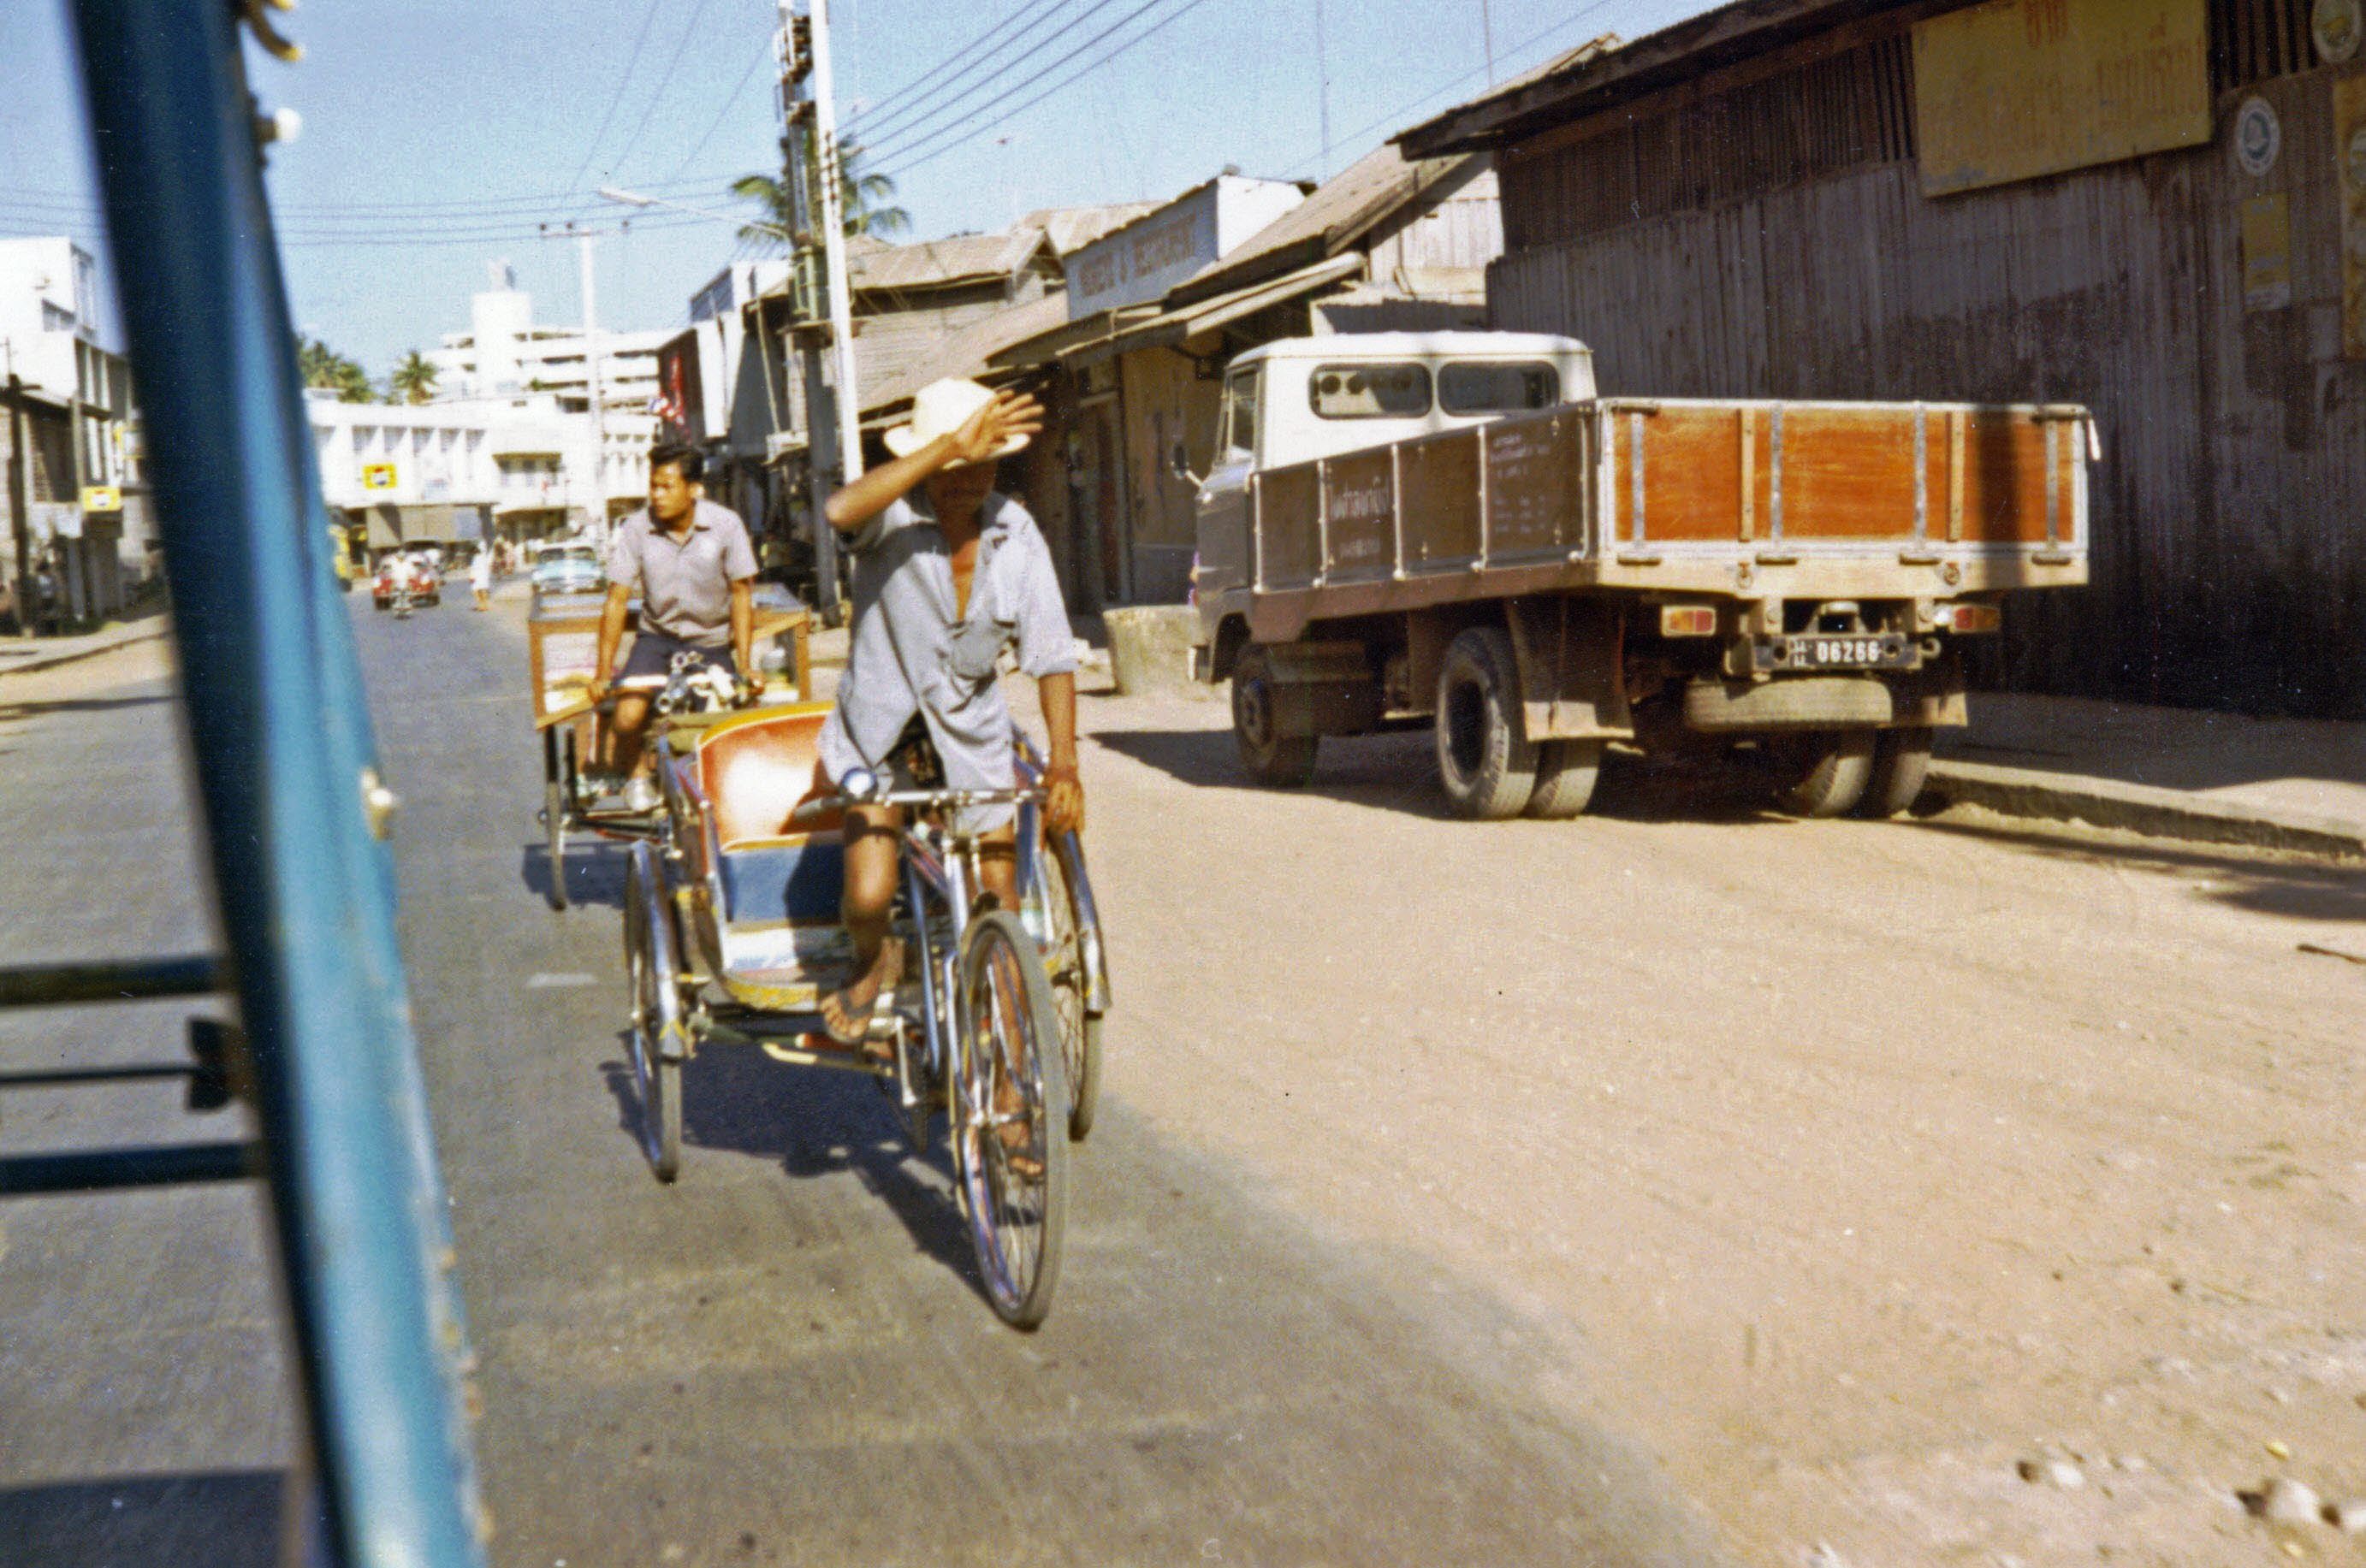 1969 View from Baht Bus